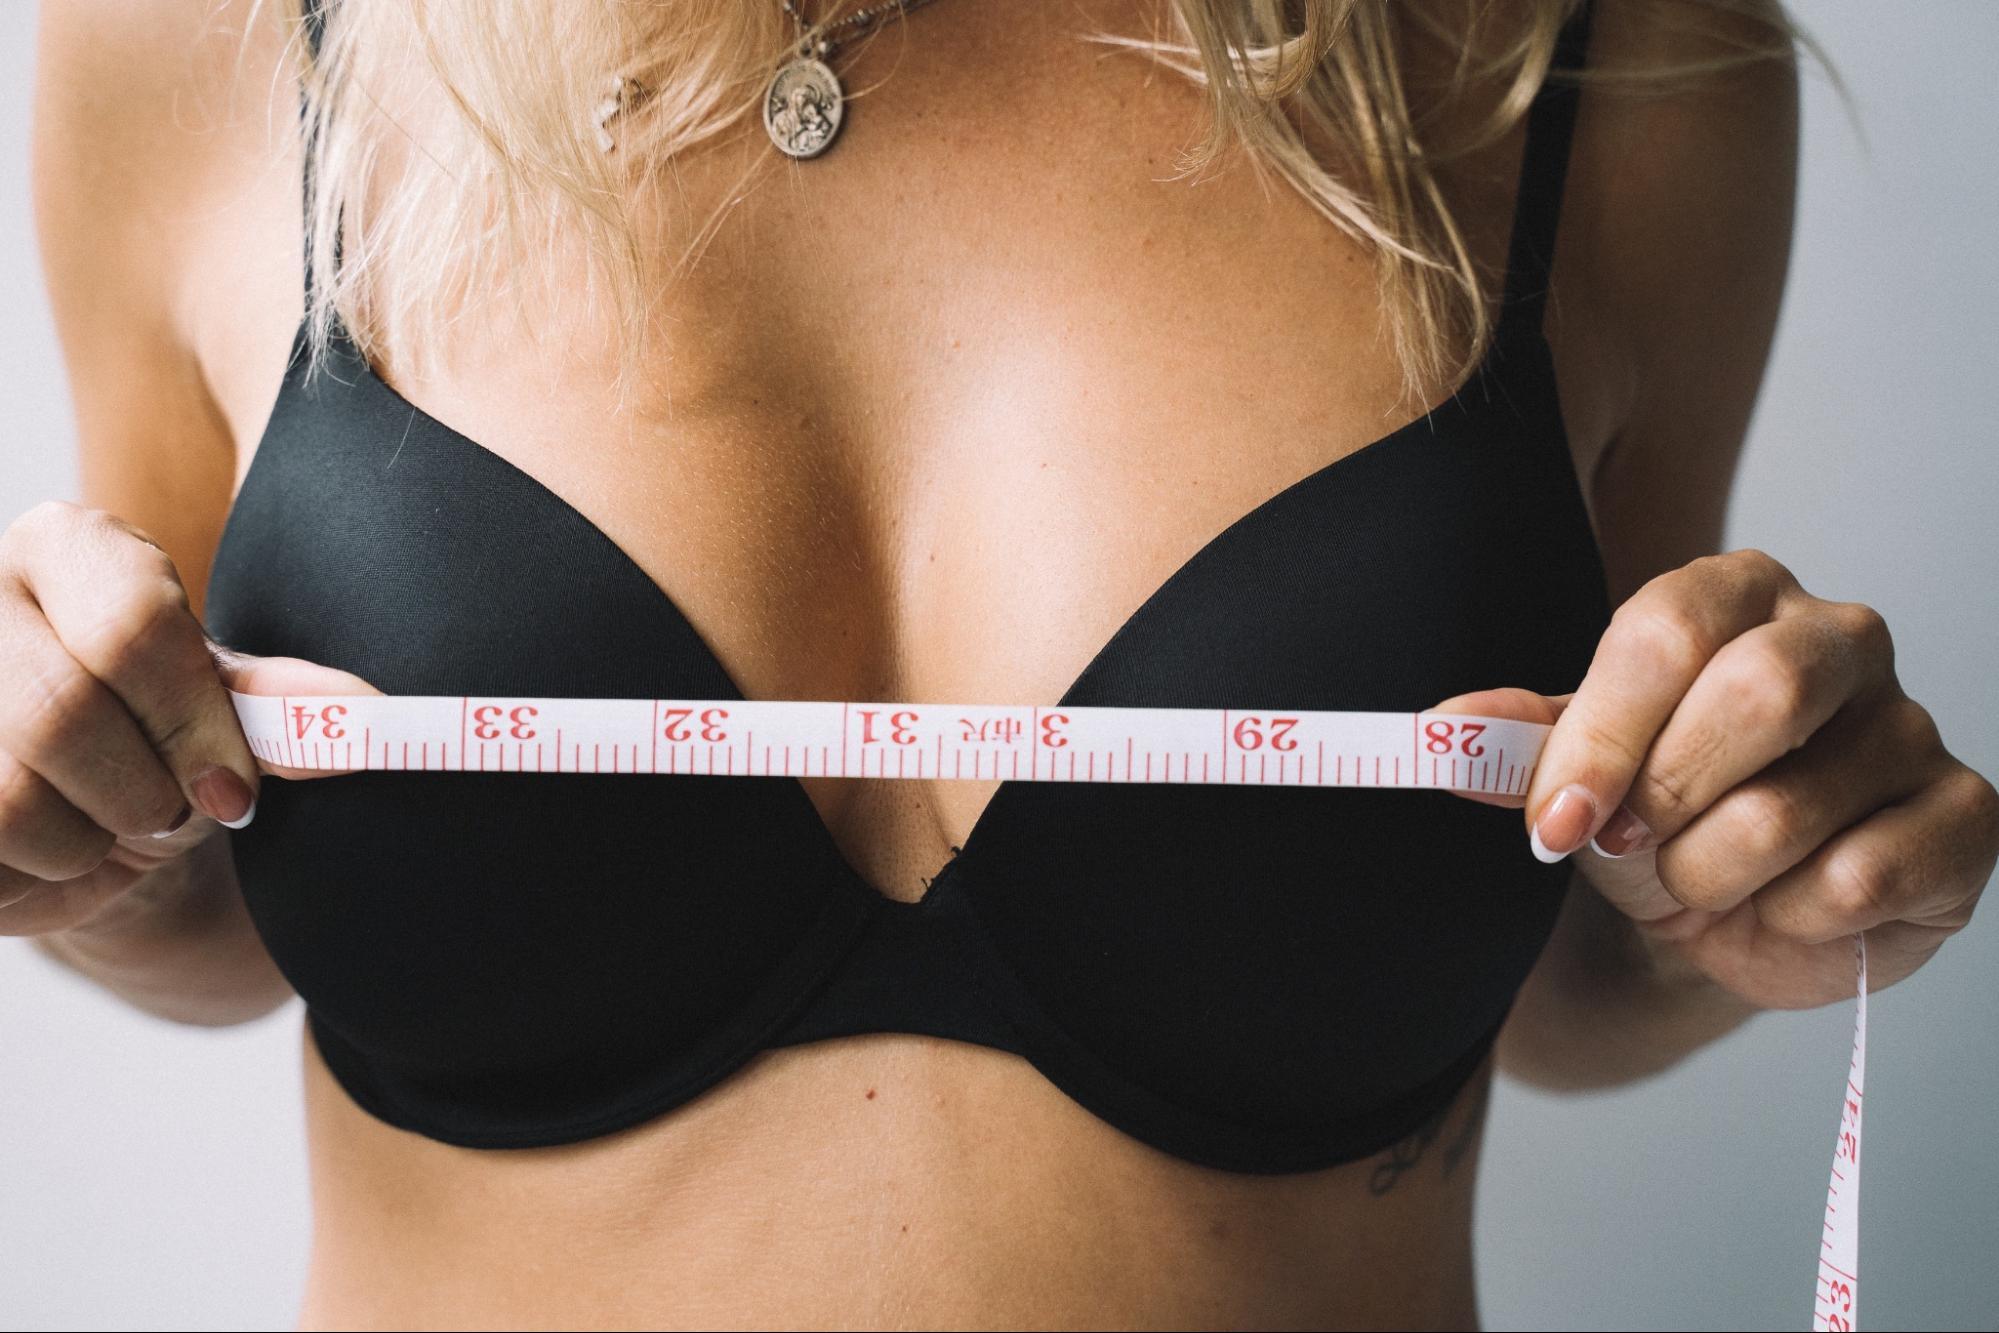 Small UK Bra Size Chart for AAA, AA, A and B cups – Bra Size Calculator